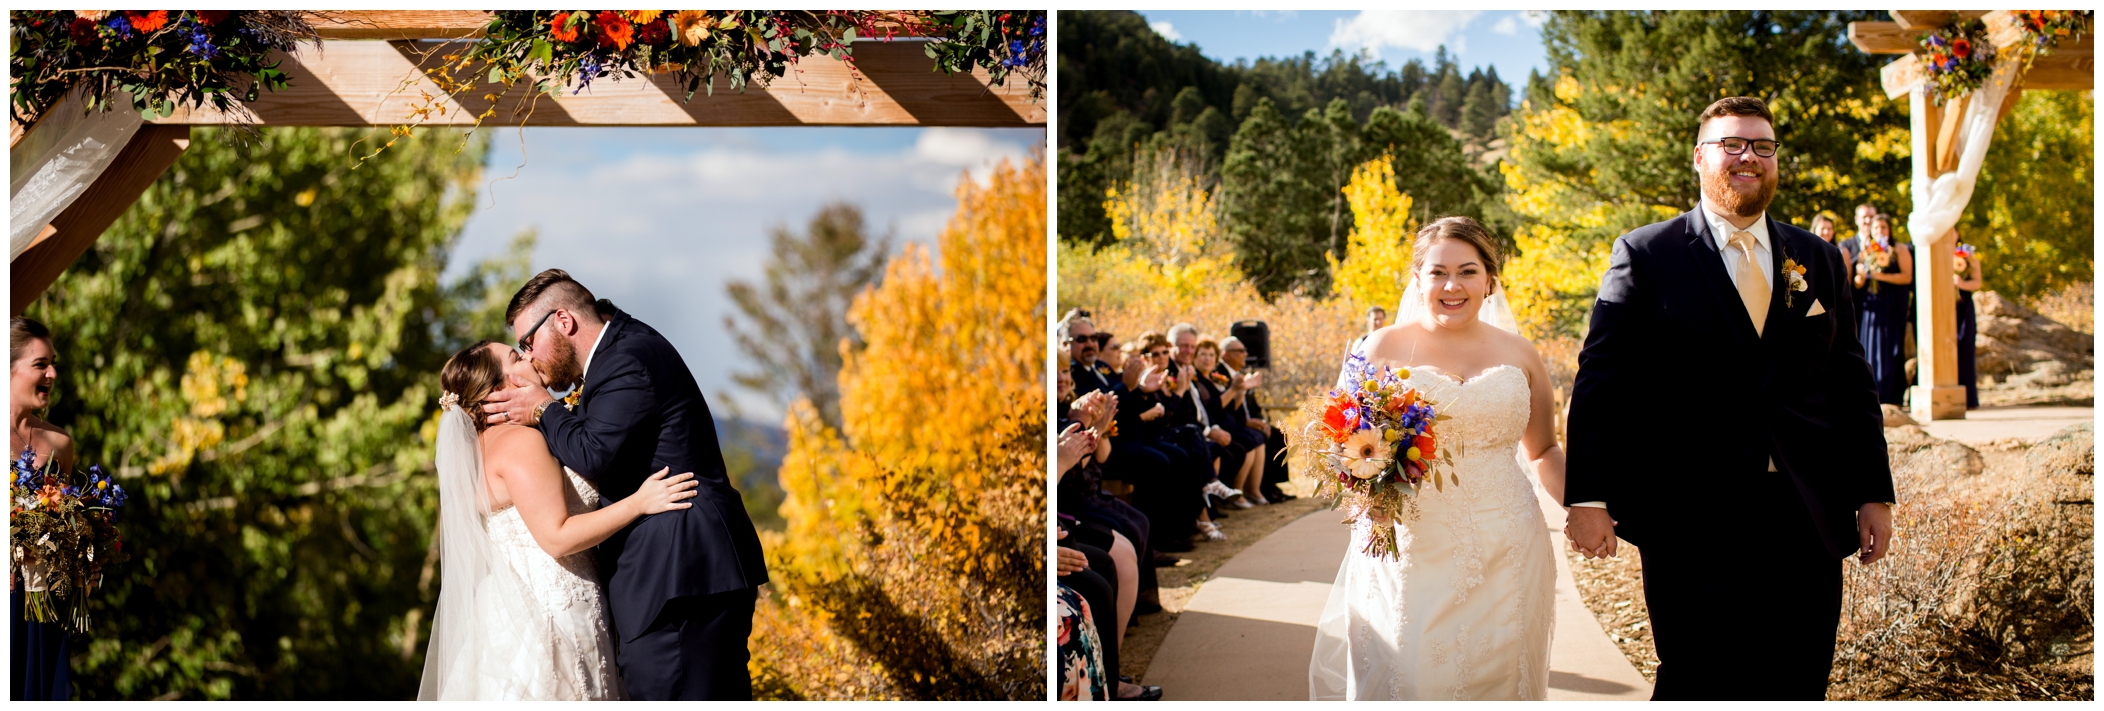 first kiss during colorado wedding ceremony